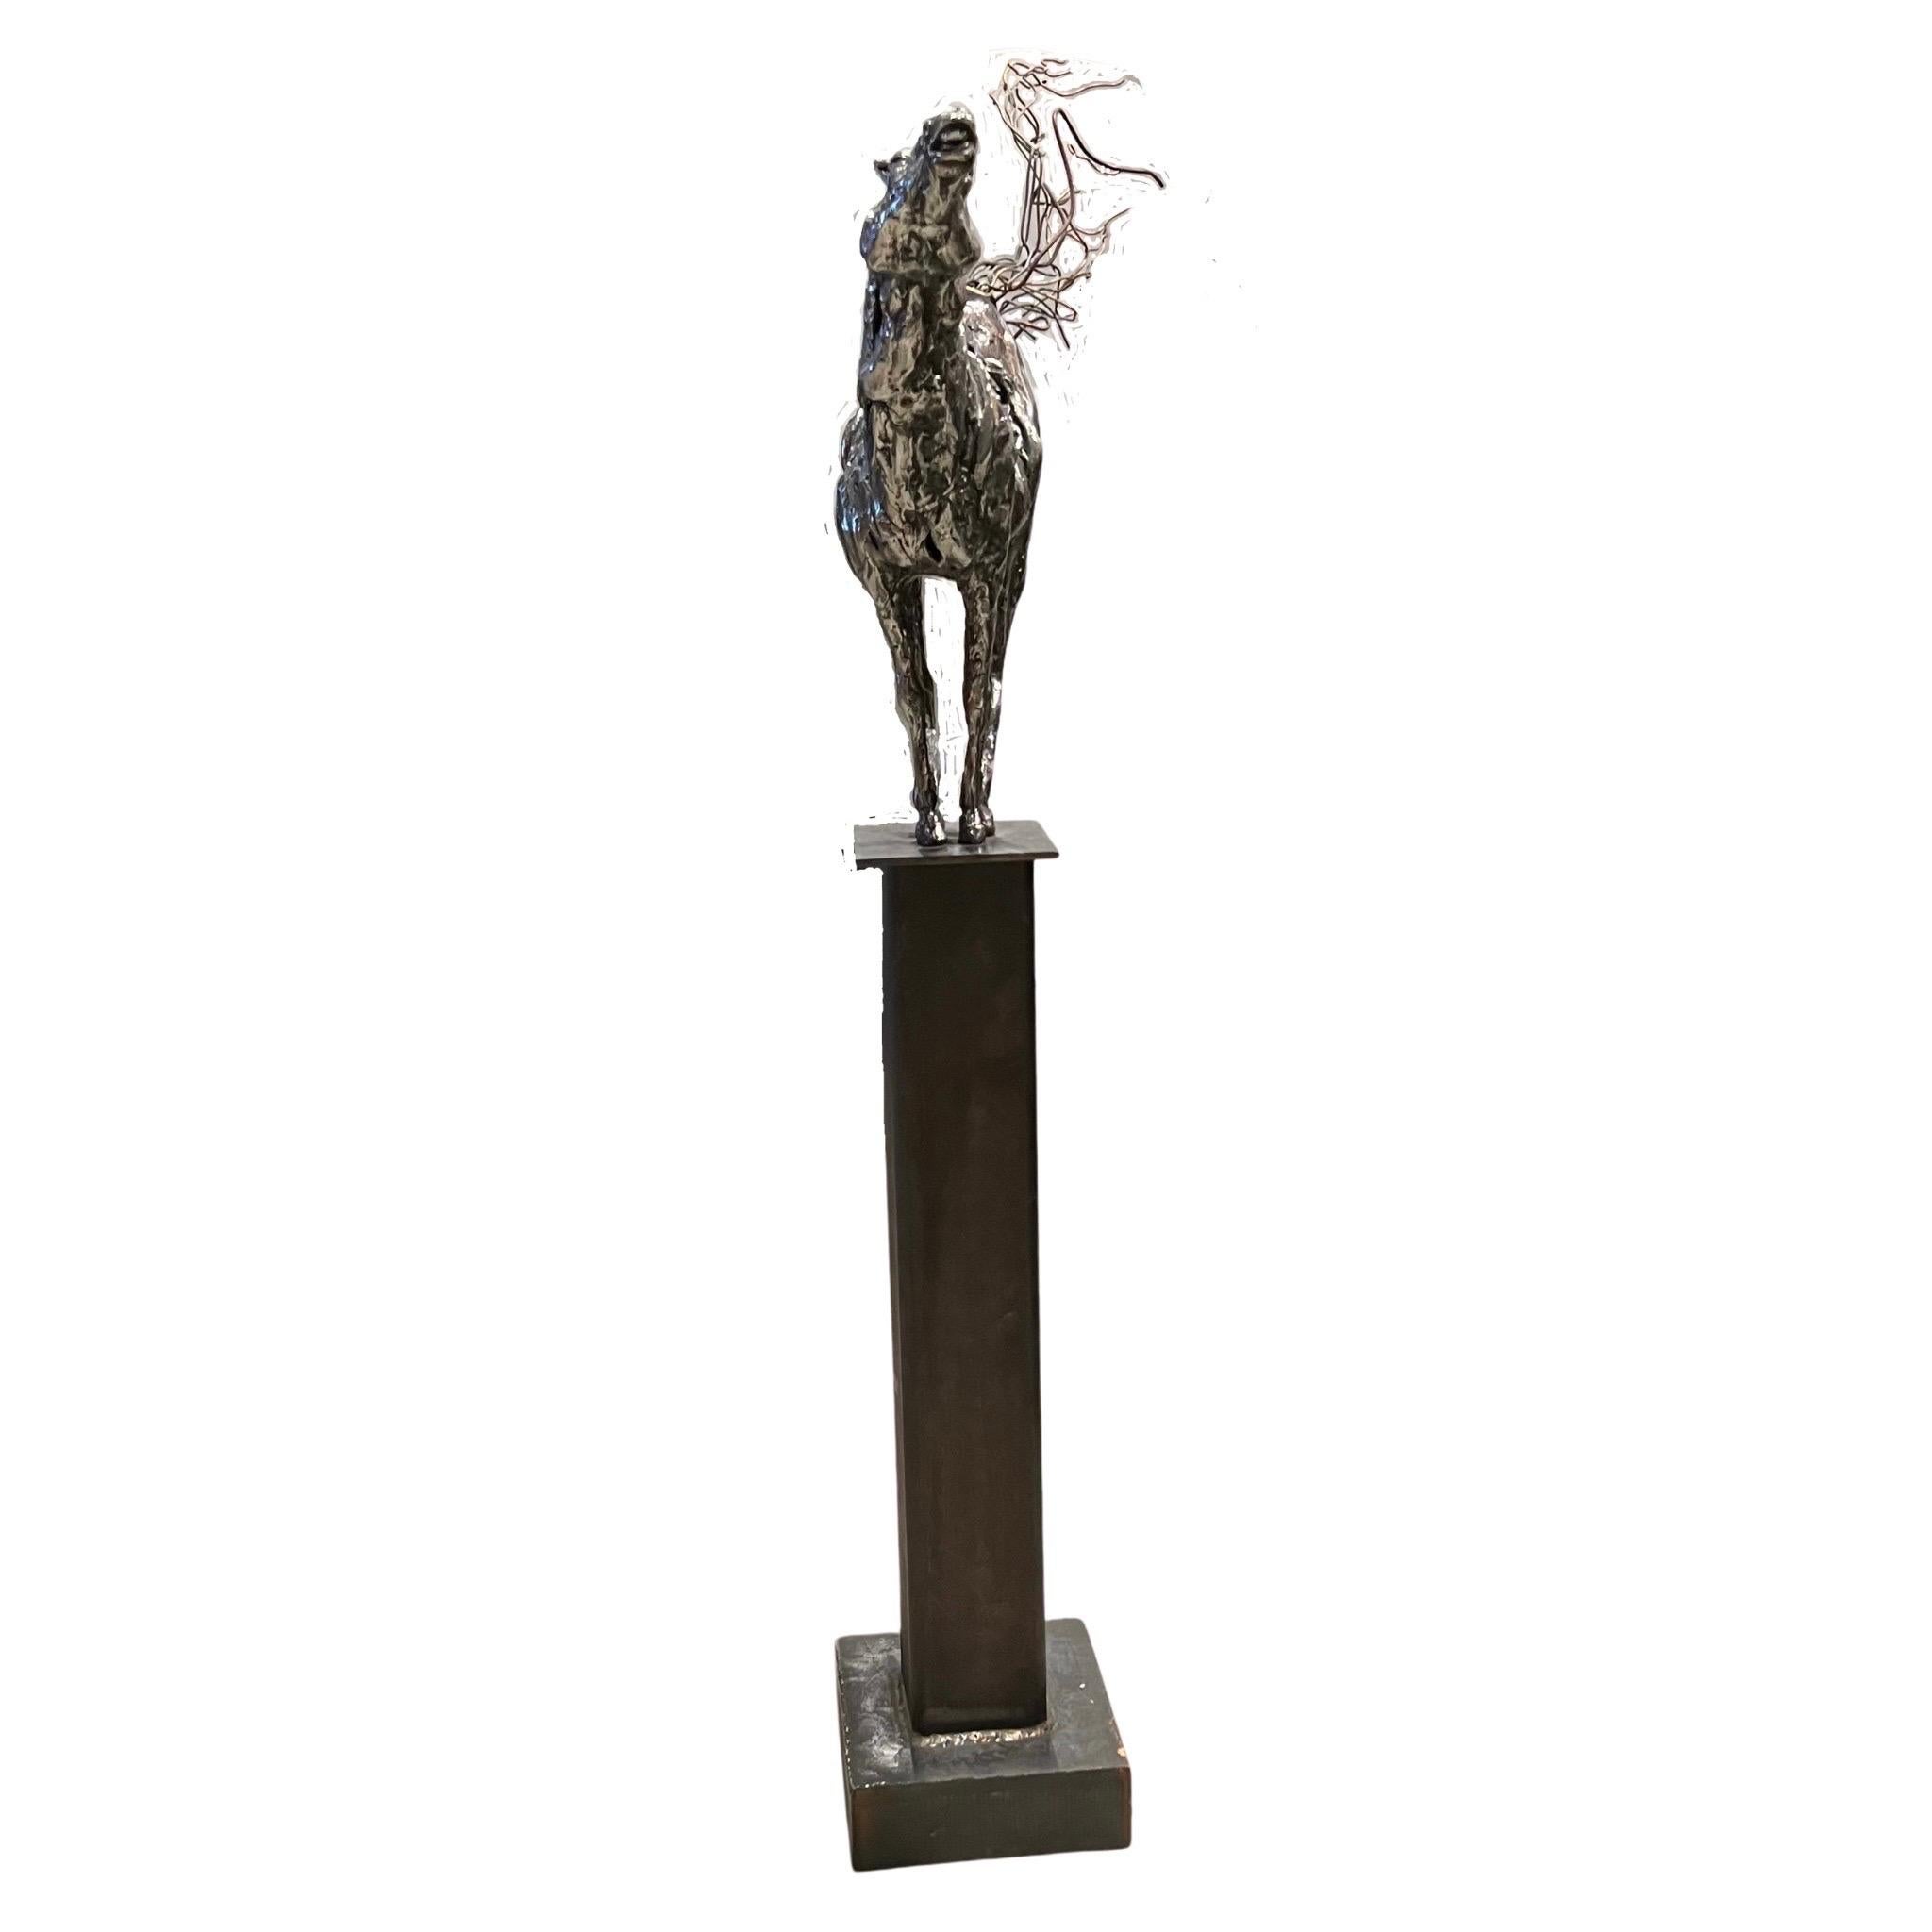 American Horselaugh Free-Standing Metal Horse Sculpture For Sale